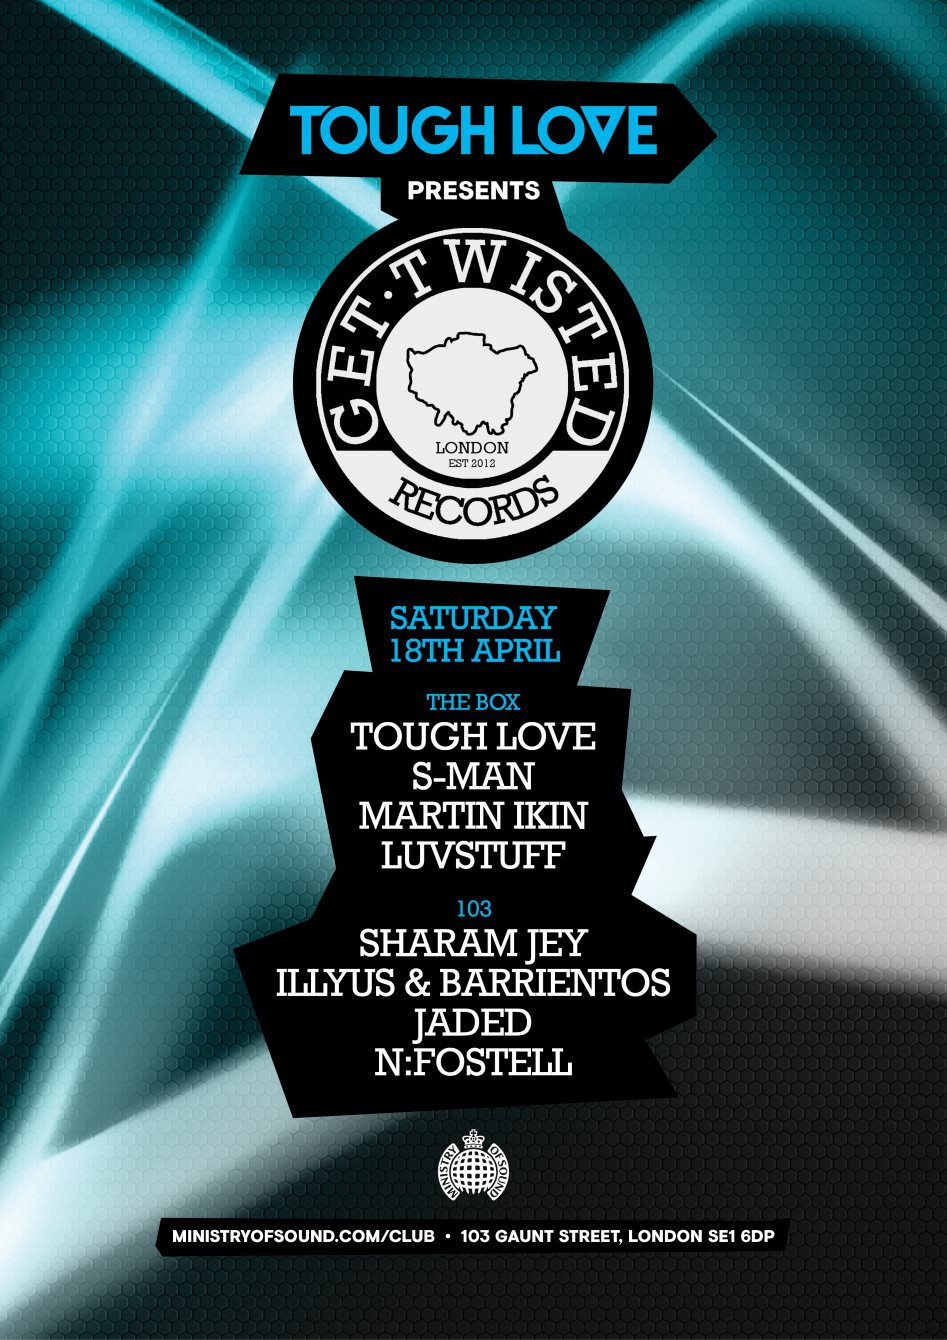 Tough Love present Get Twisted: S-Man + Martin Ikin + Sharam Jey - Flyer front